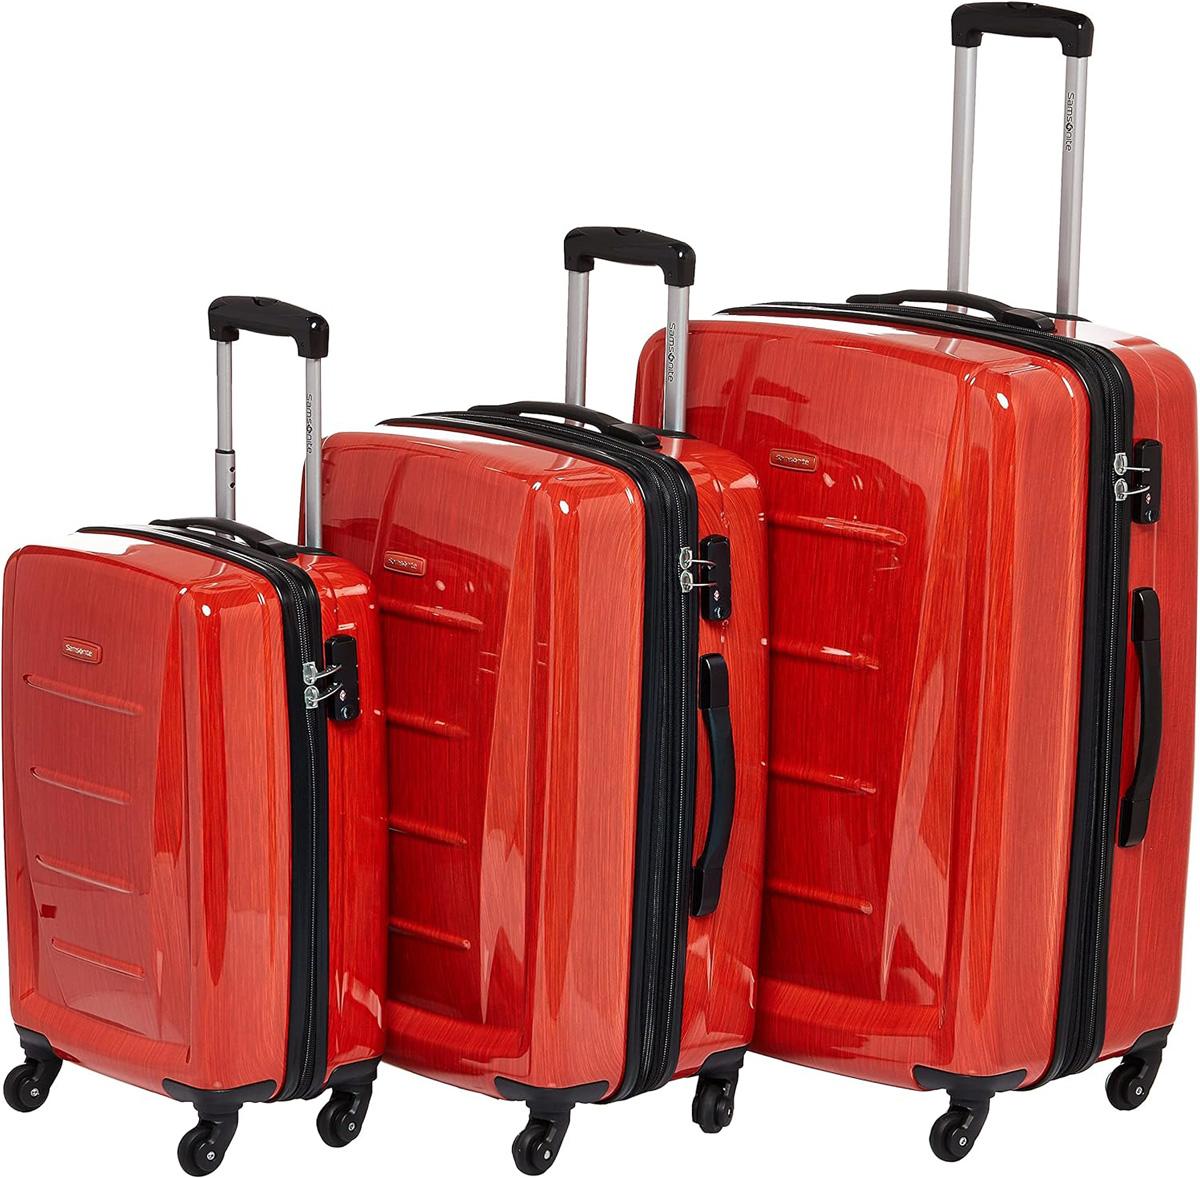 Samsonite Winfield 2 Fashion 3-Piece Spinner Luggage Set for $239.99 Shipped